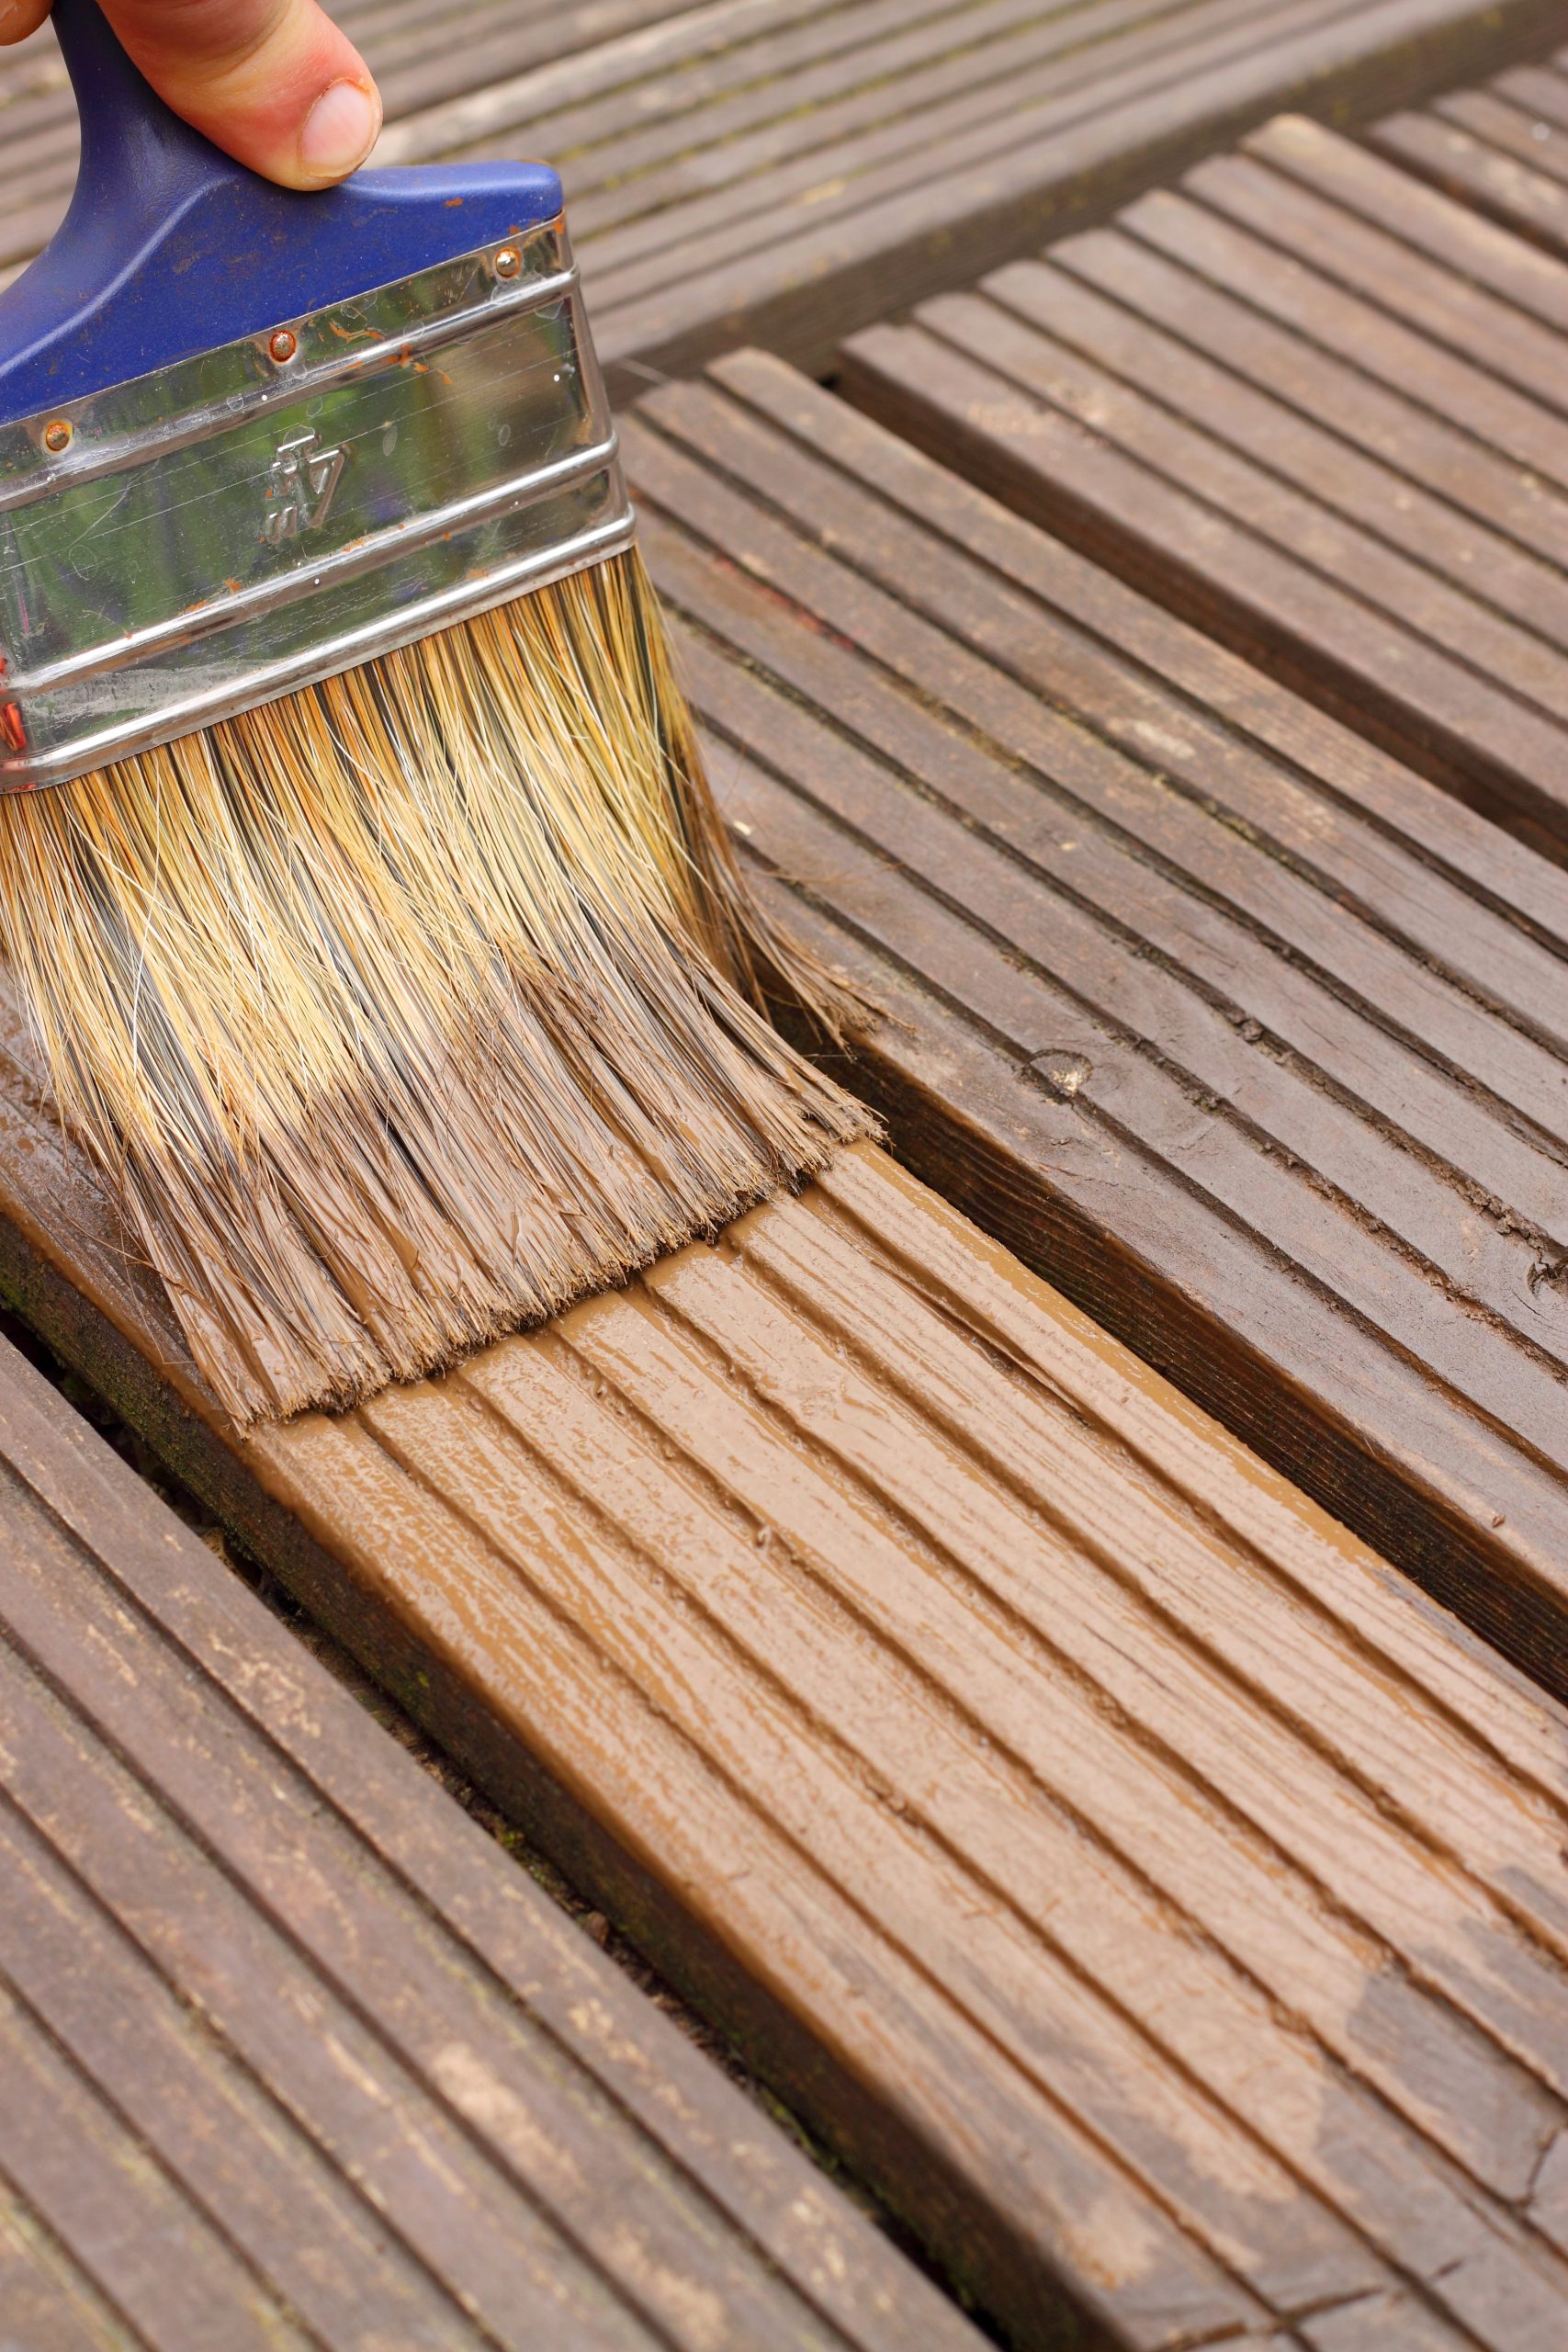 Paint brush applying stain to deck